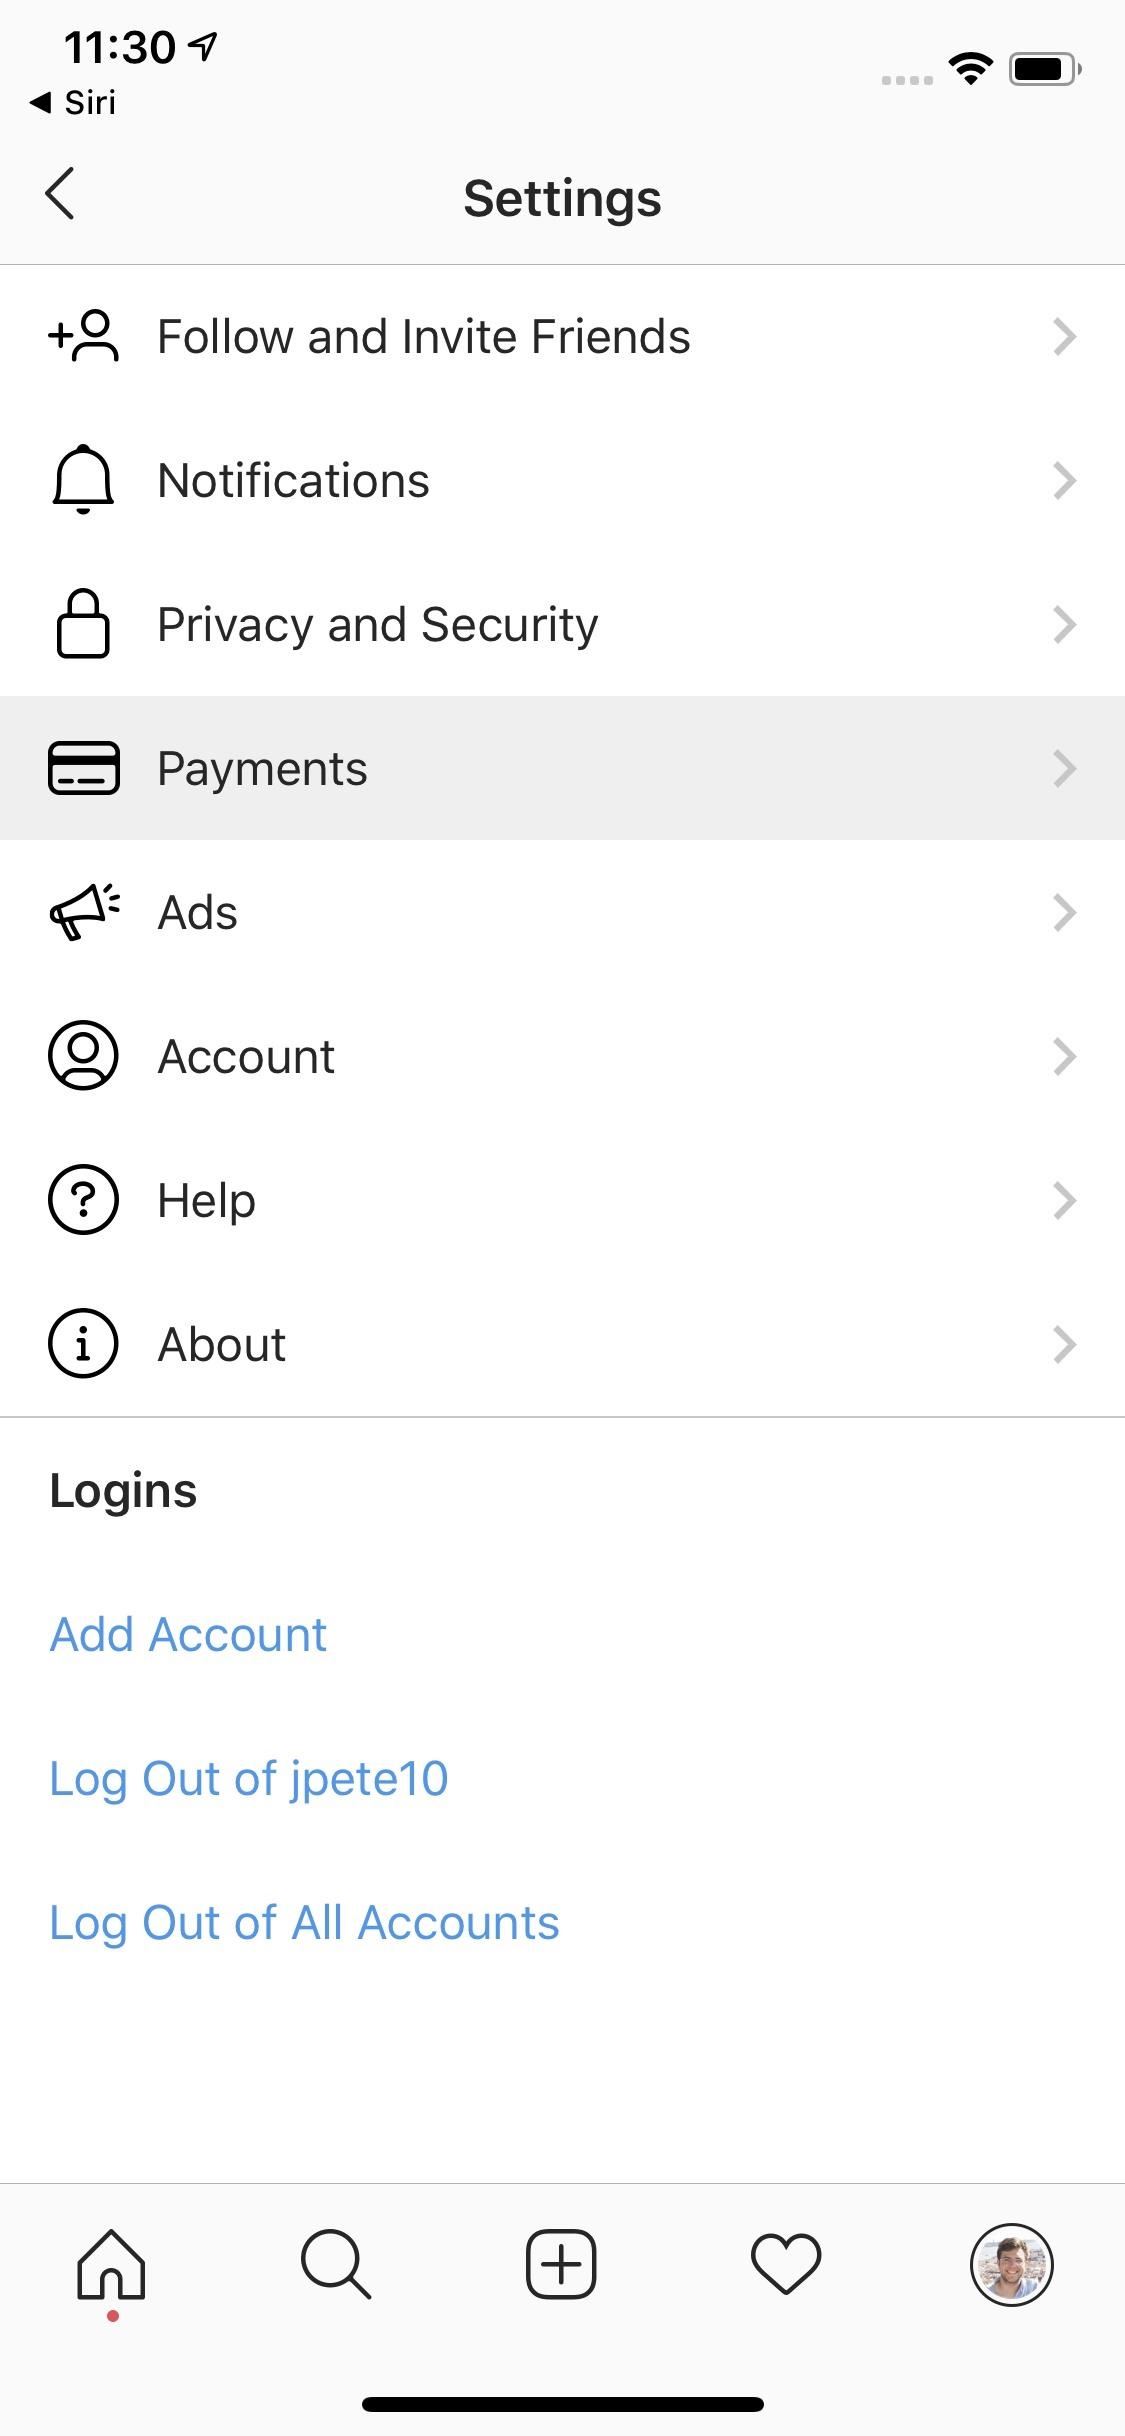 Make Buying Stuff Easier on Instagram with the Checkout Feature